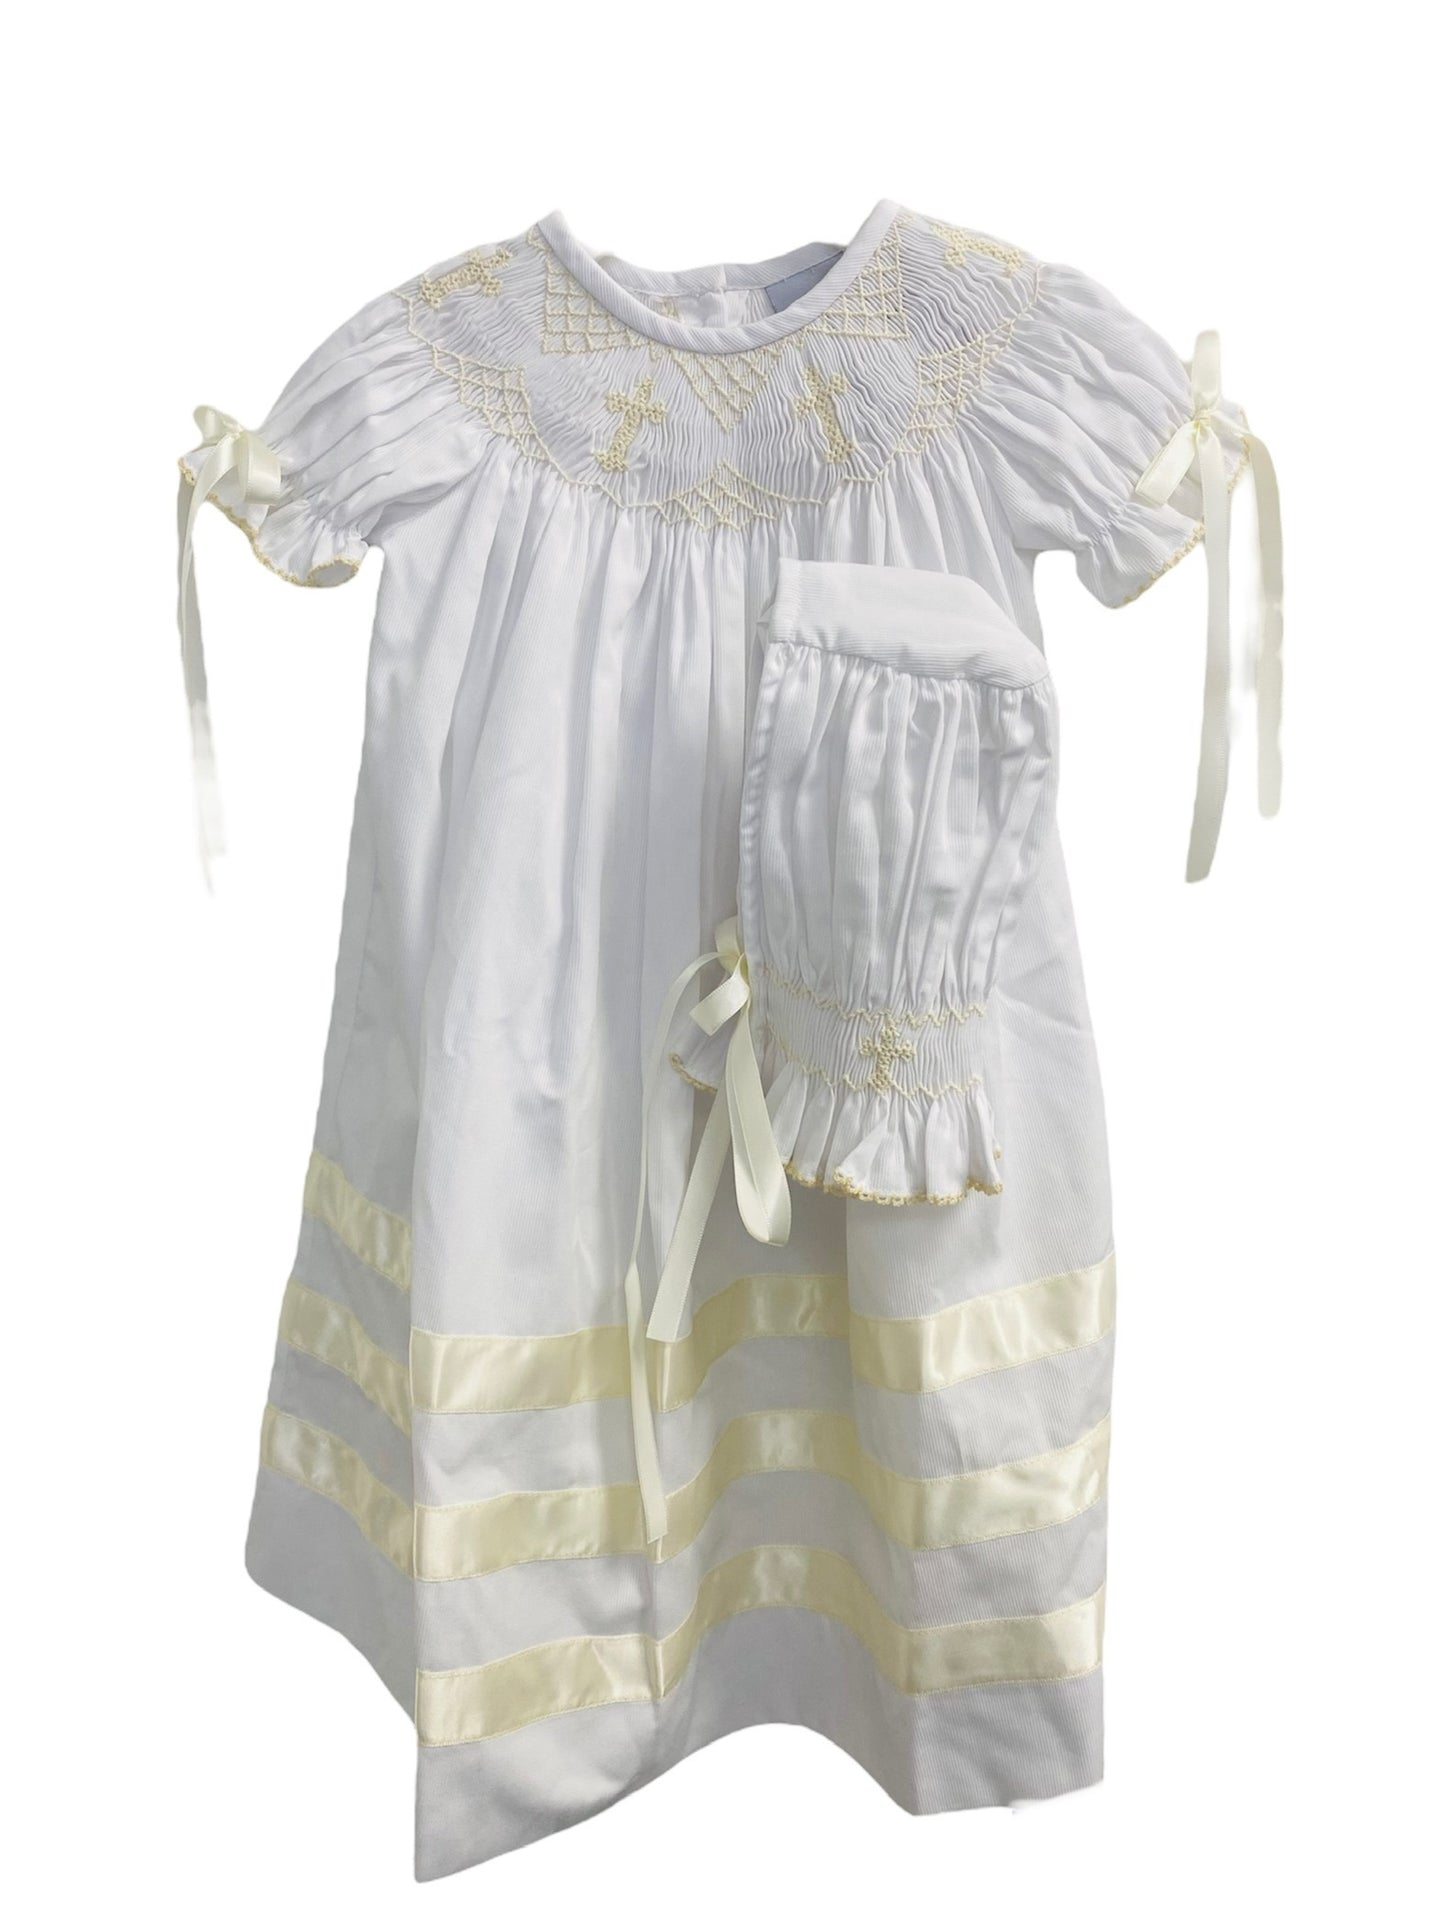 White Christening Gown with Smocked Crosses